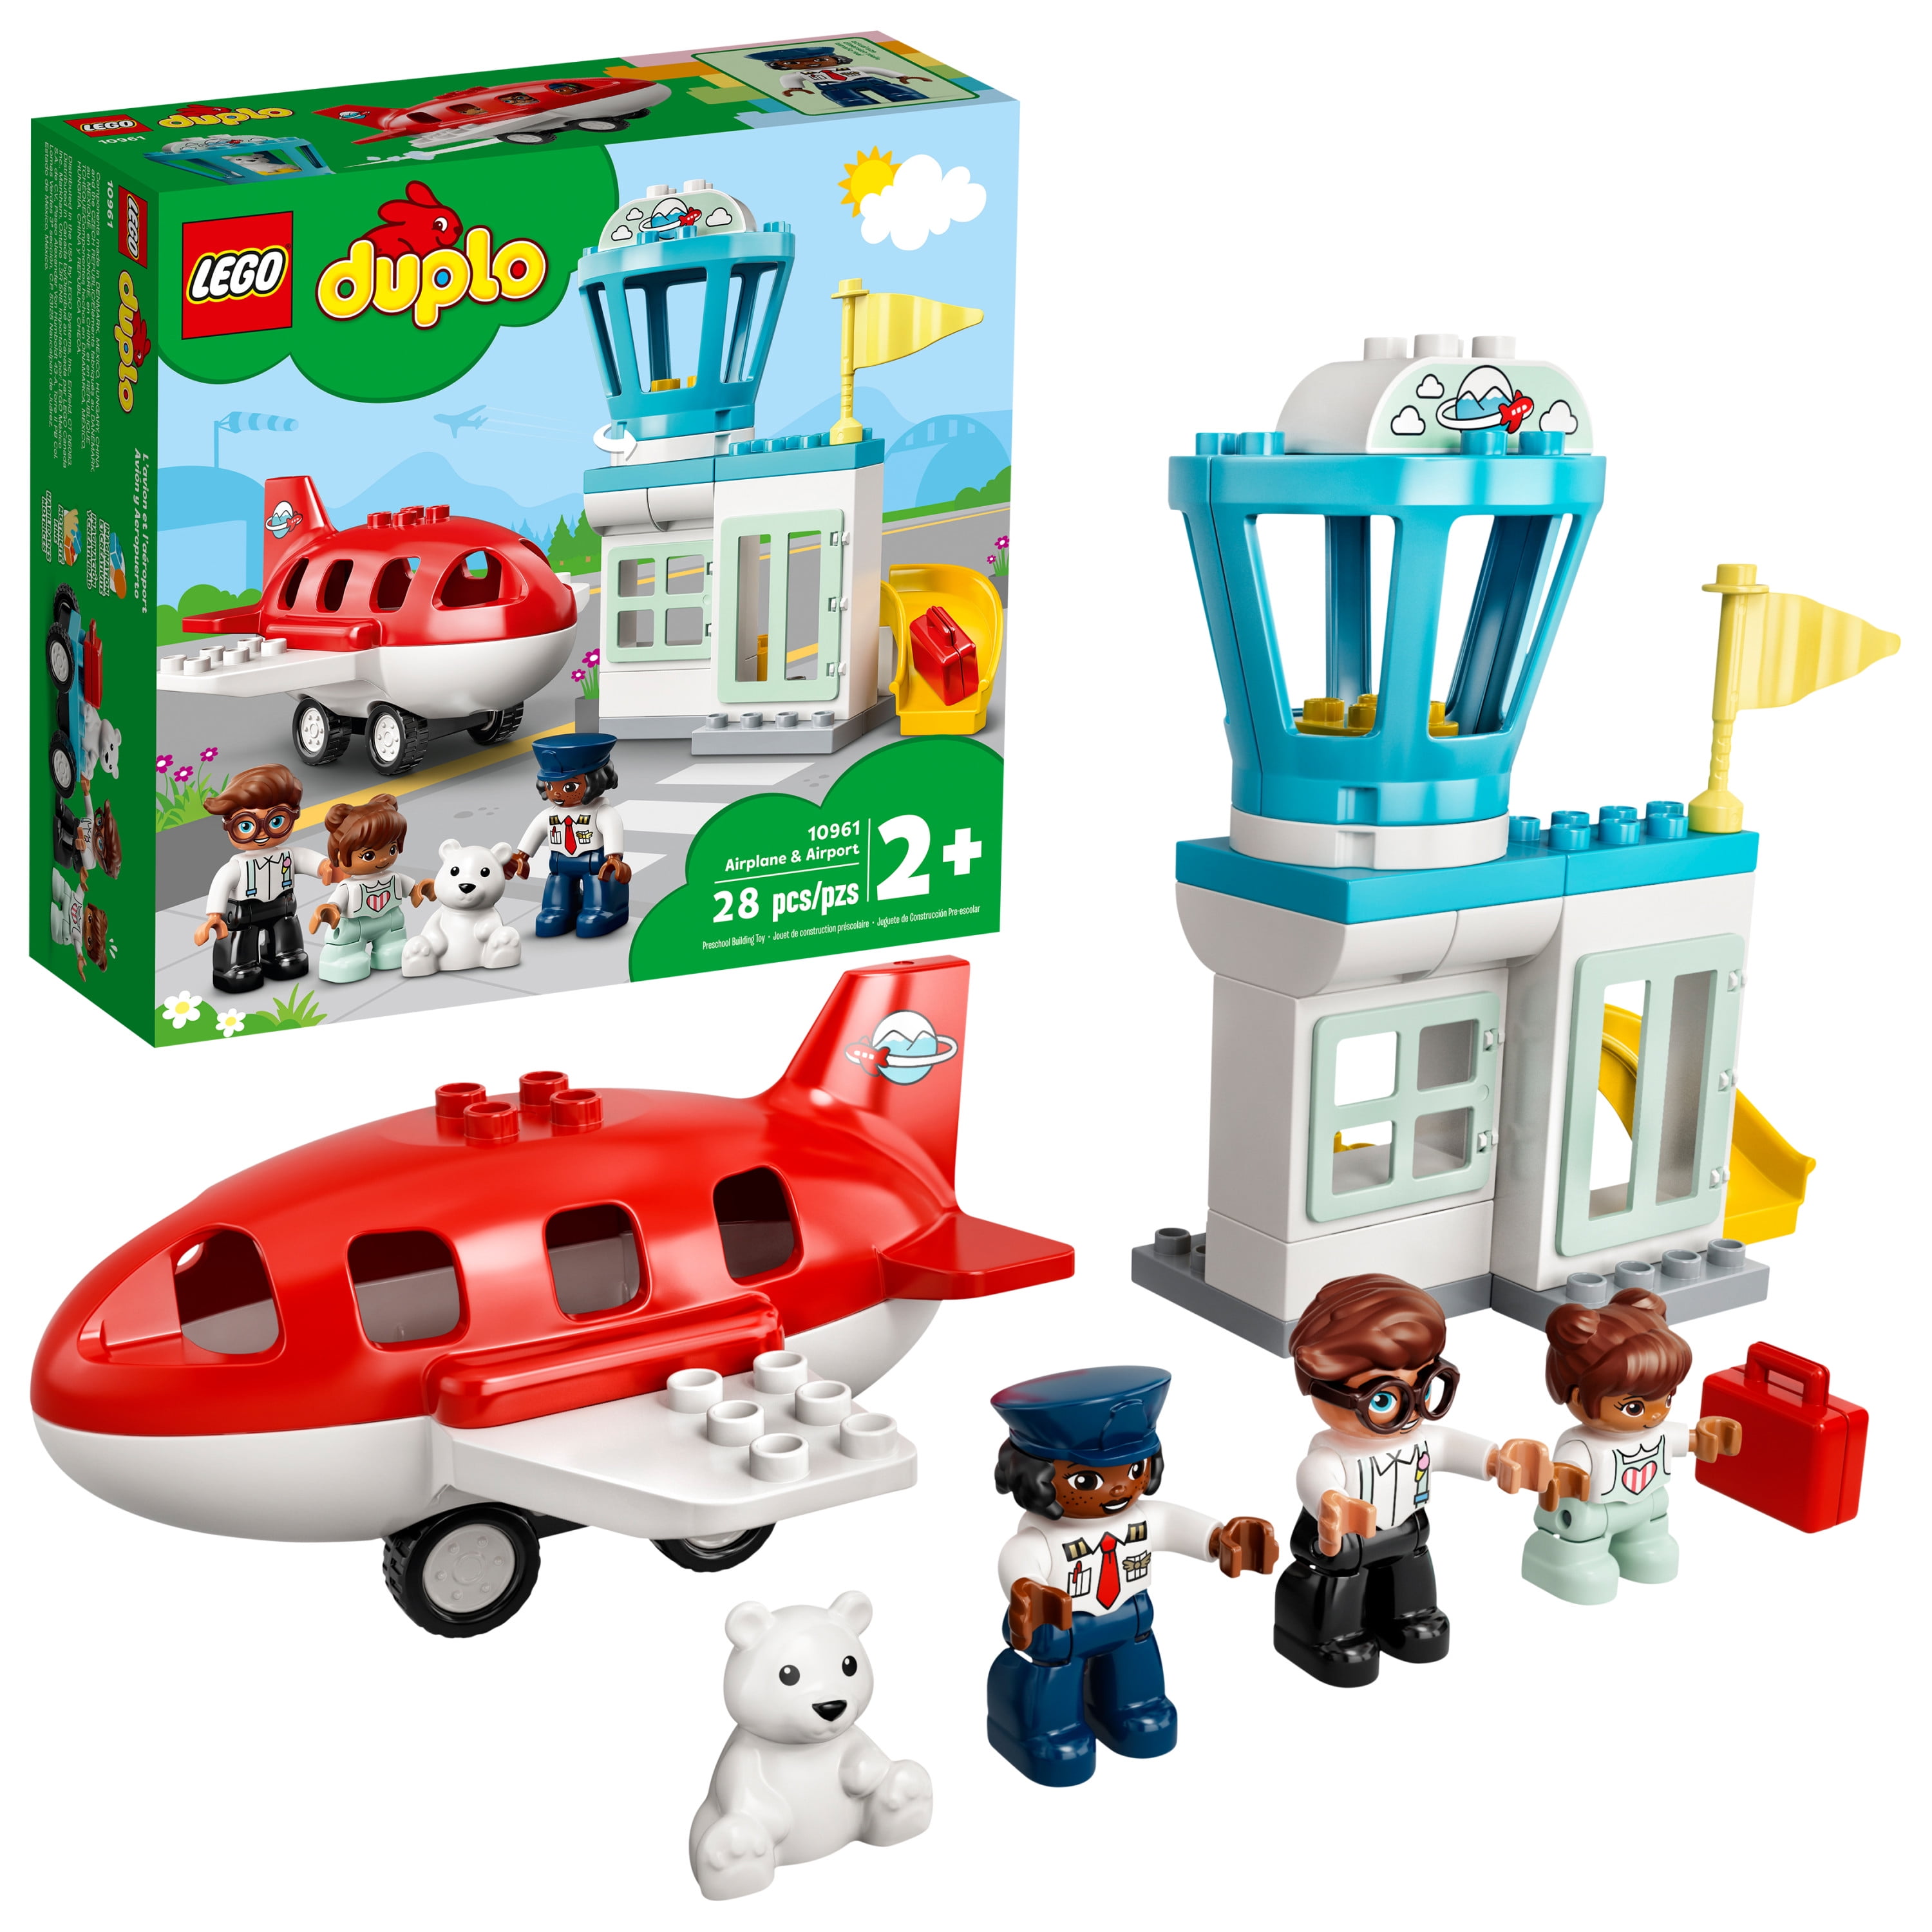 LEGO DUPLO Town Airplane & Airport 10961 Building Toy; Fun Gift for  Toddlers (28 Pieces)